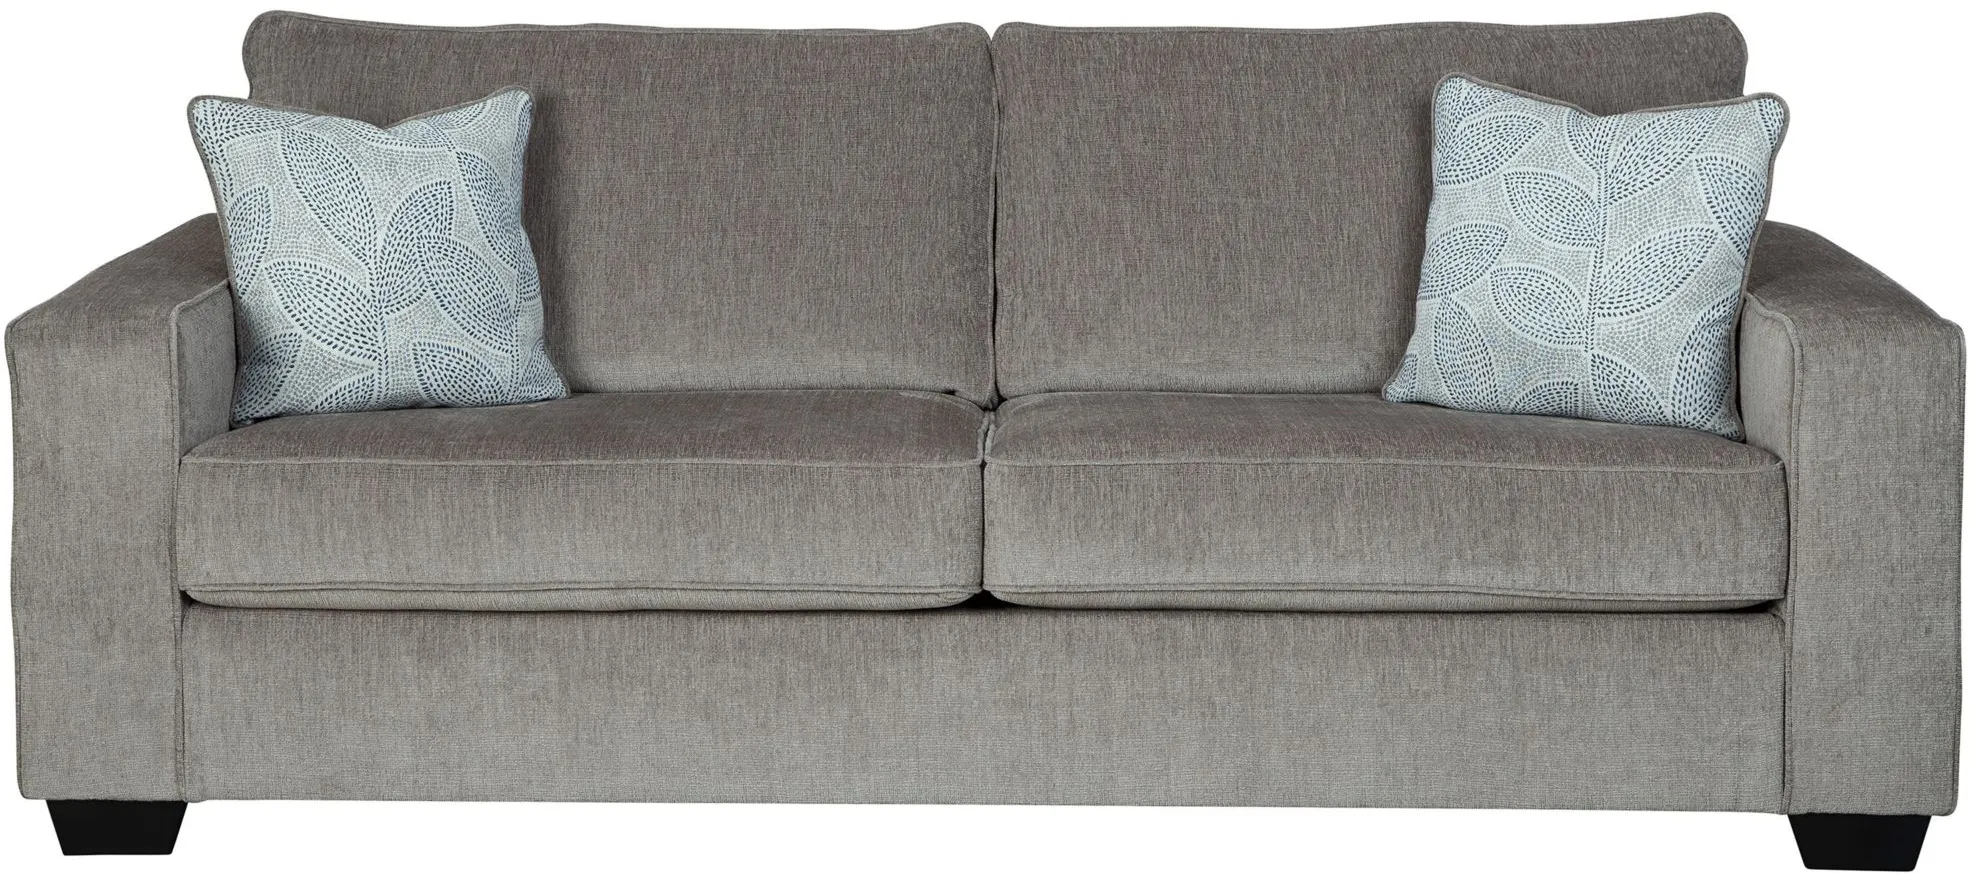 Adelson Chenille Queen Sleeper Sofa in Alloy by Ashley Furniture